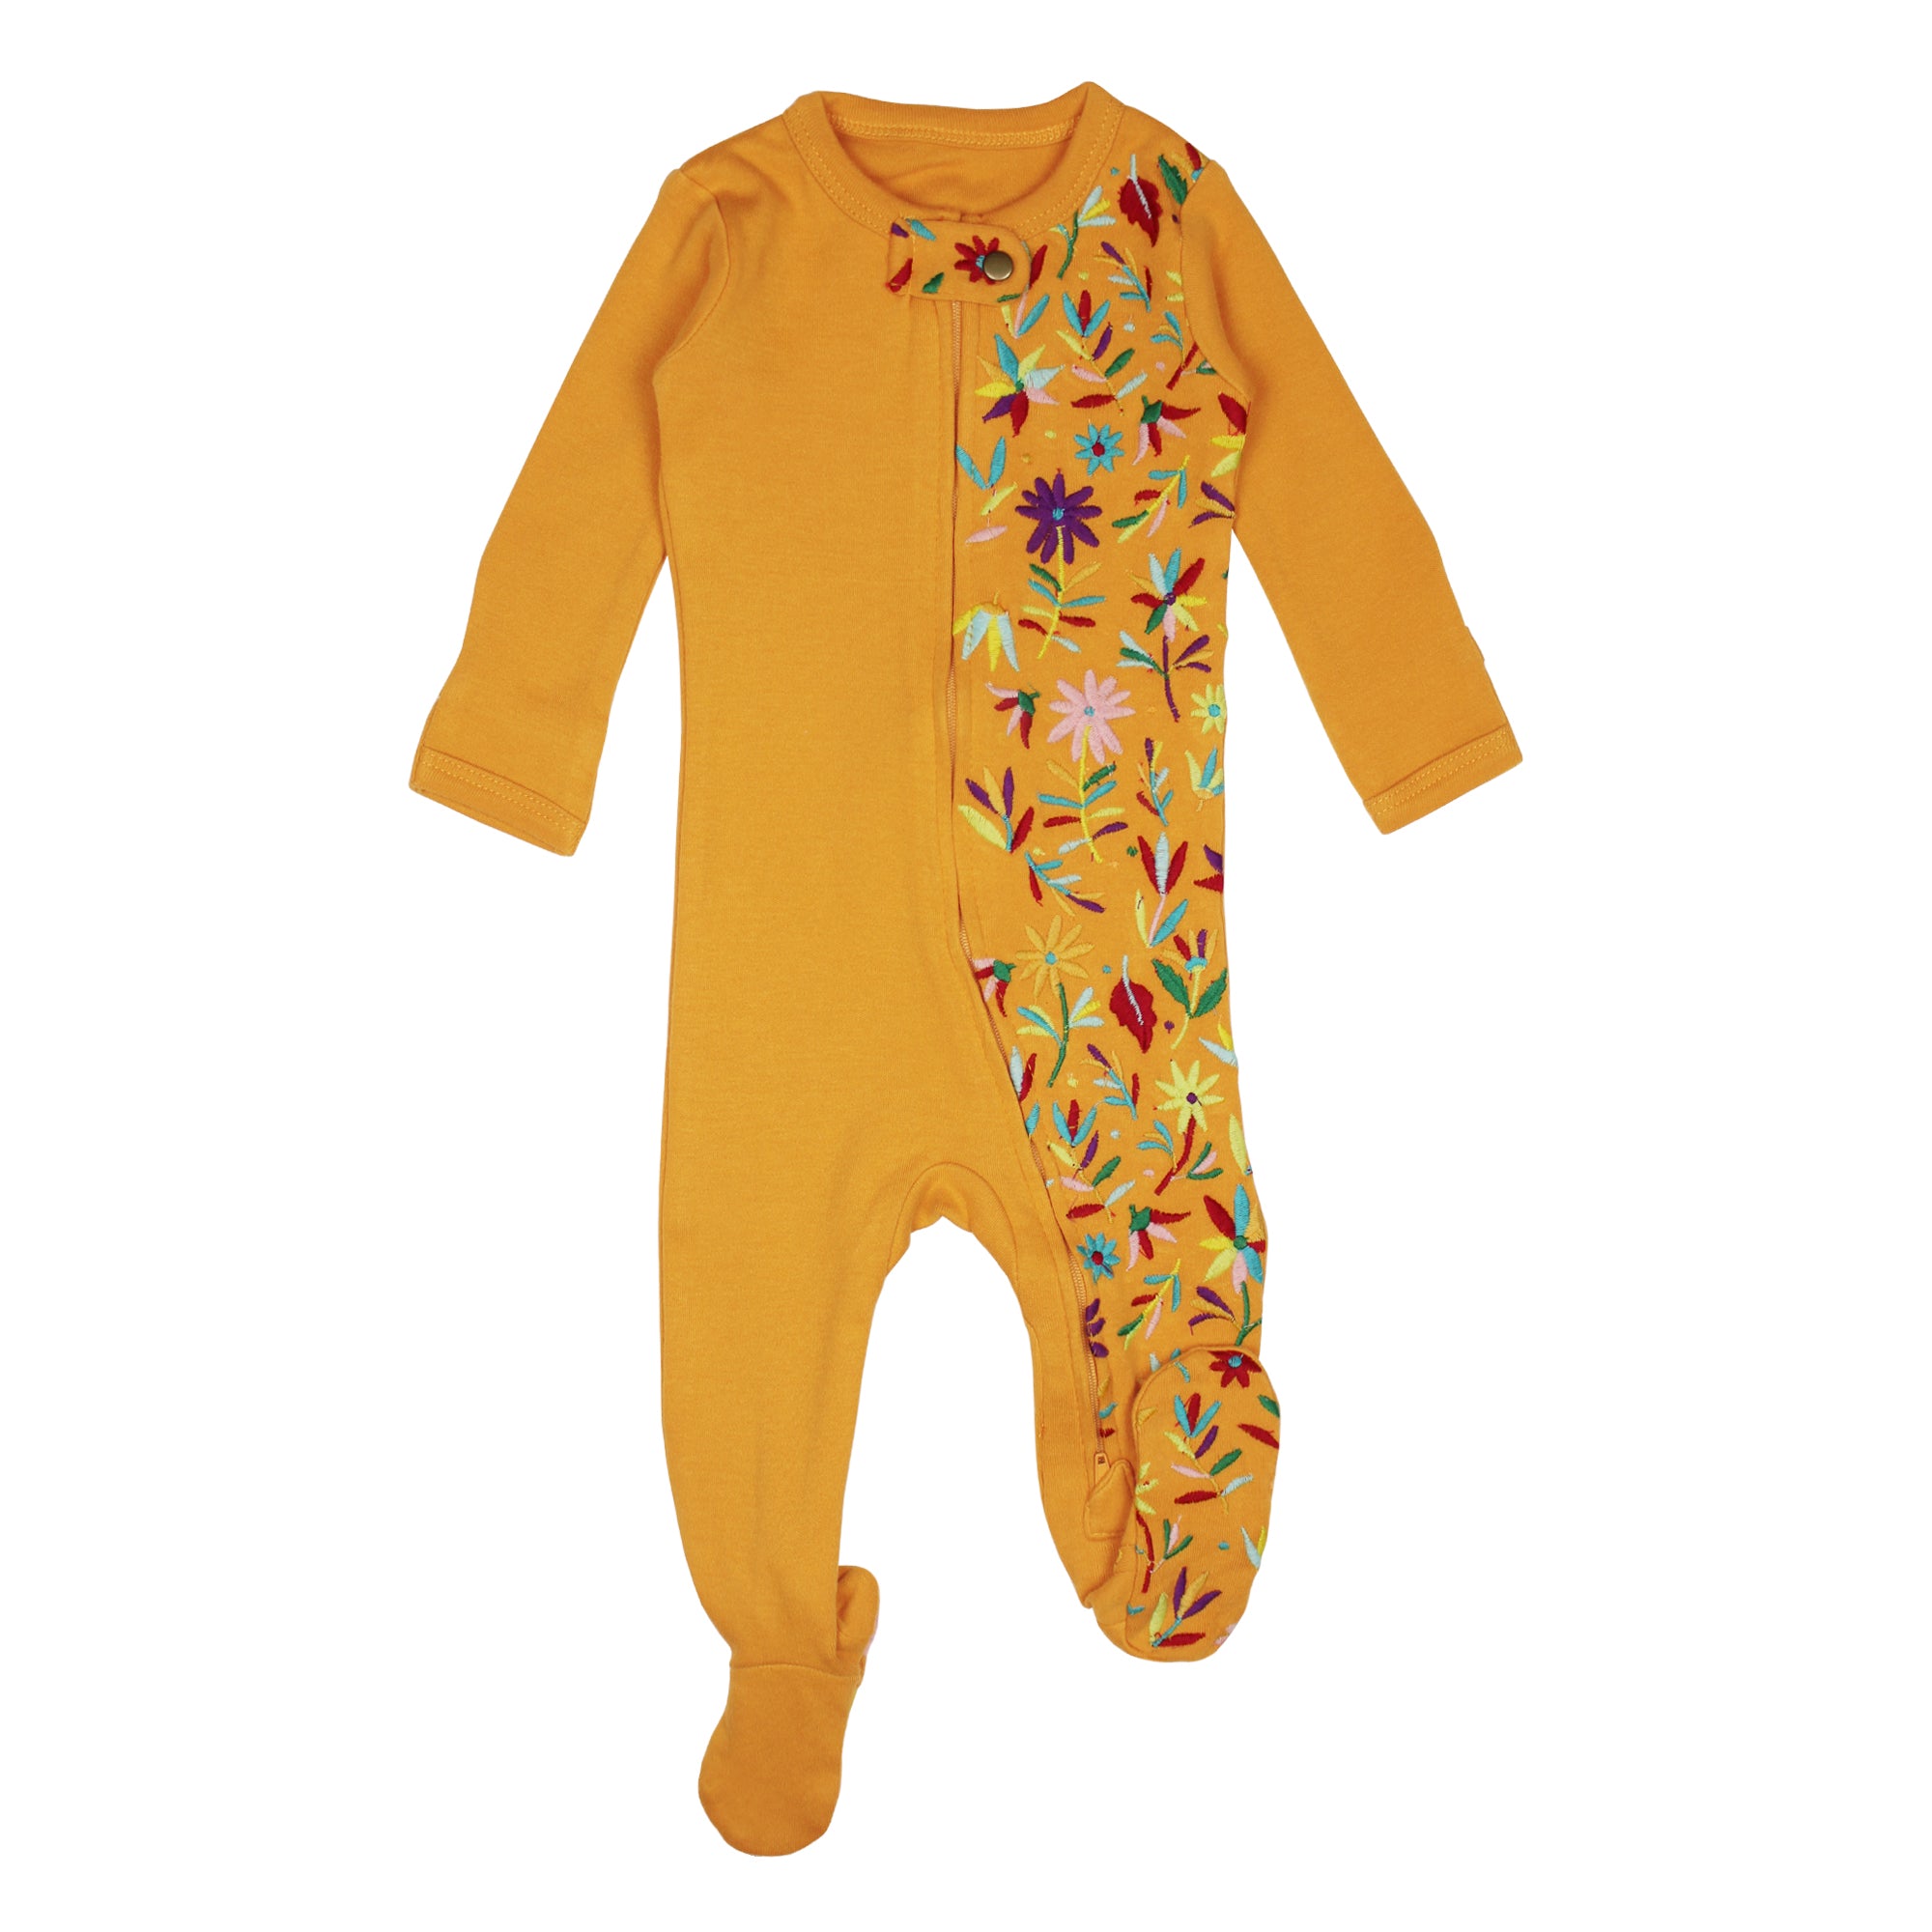 L'ovedbaby Embroidered Zipper Footie